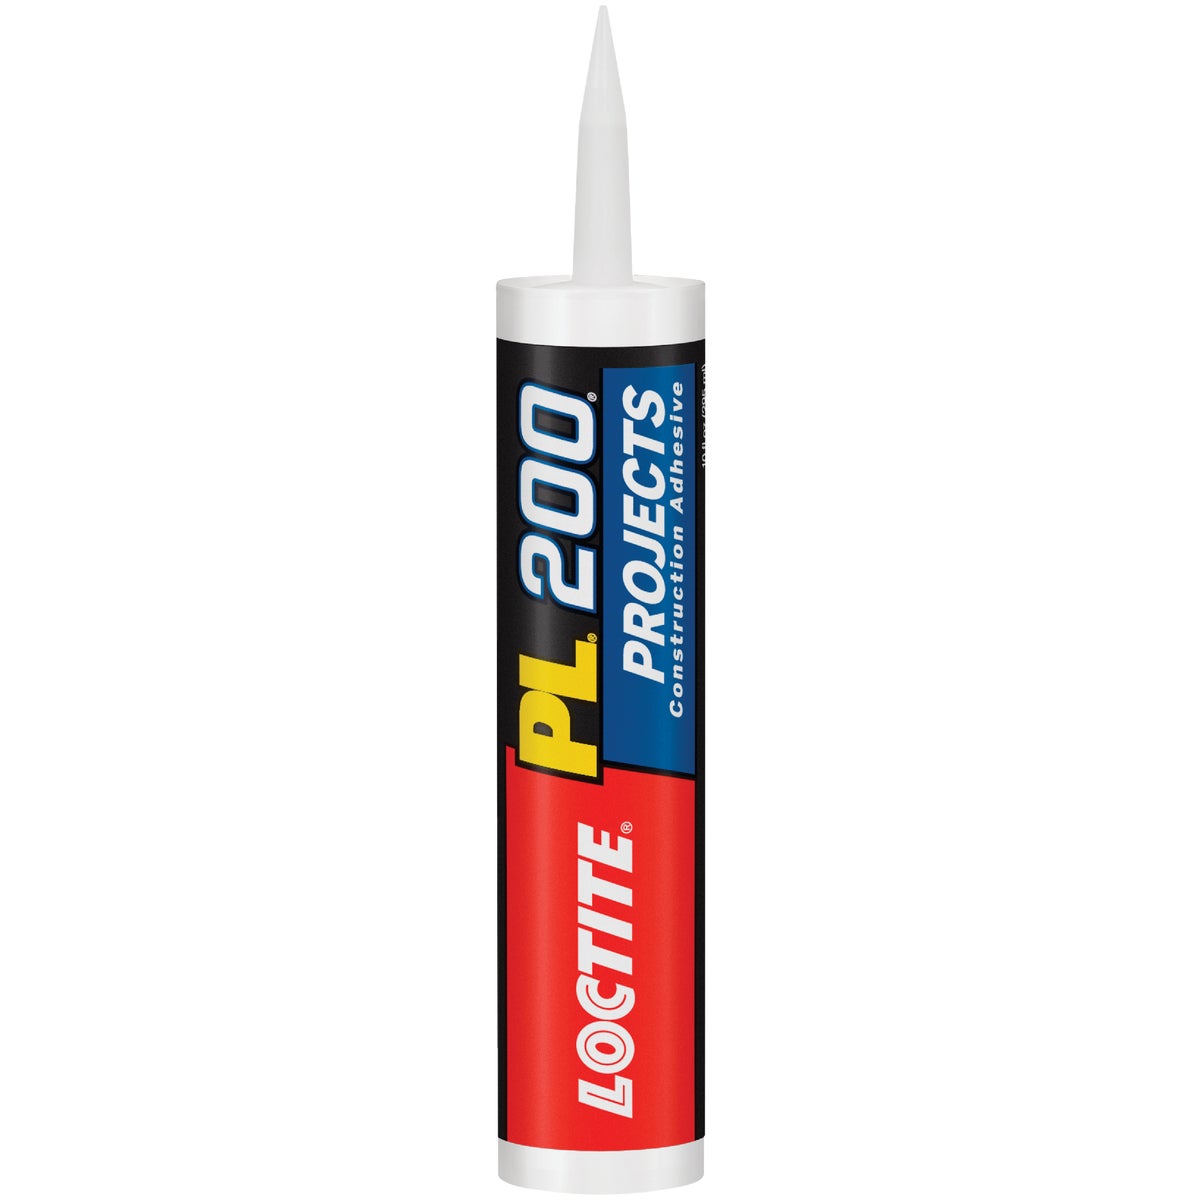 Item 264323, A premium grade adhesive for paneling, drywall, and other light 